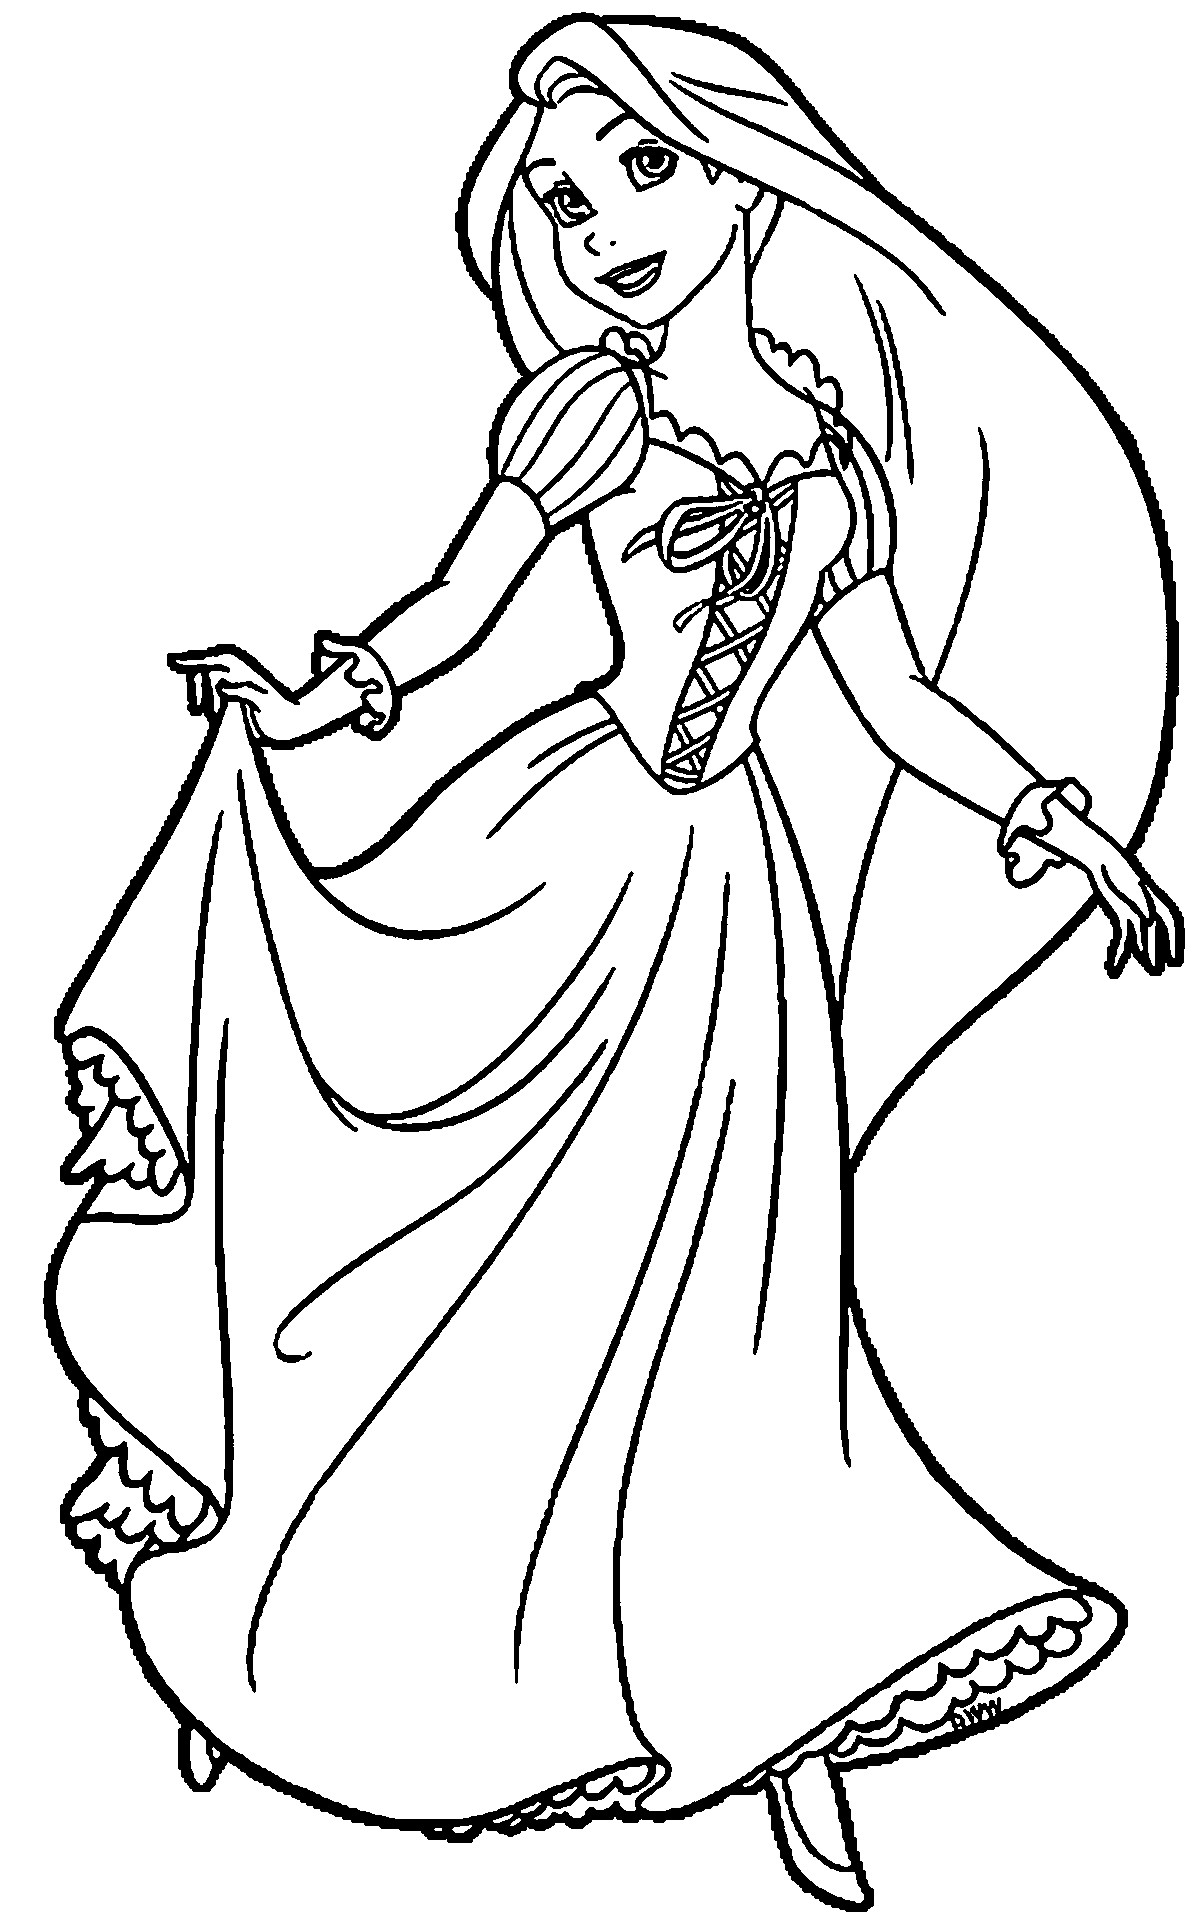 Niki Coloring Pages For Boys
 Rapunzel And Flynn Coloring Page WeColoringPage 30